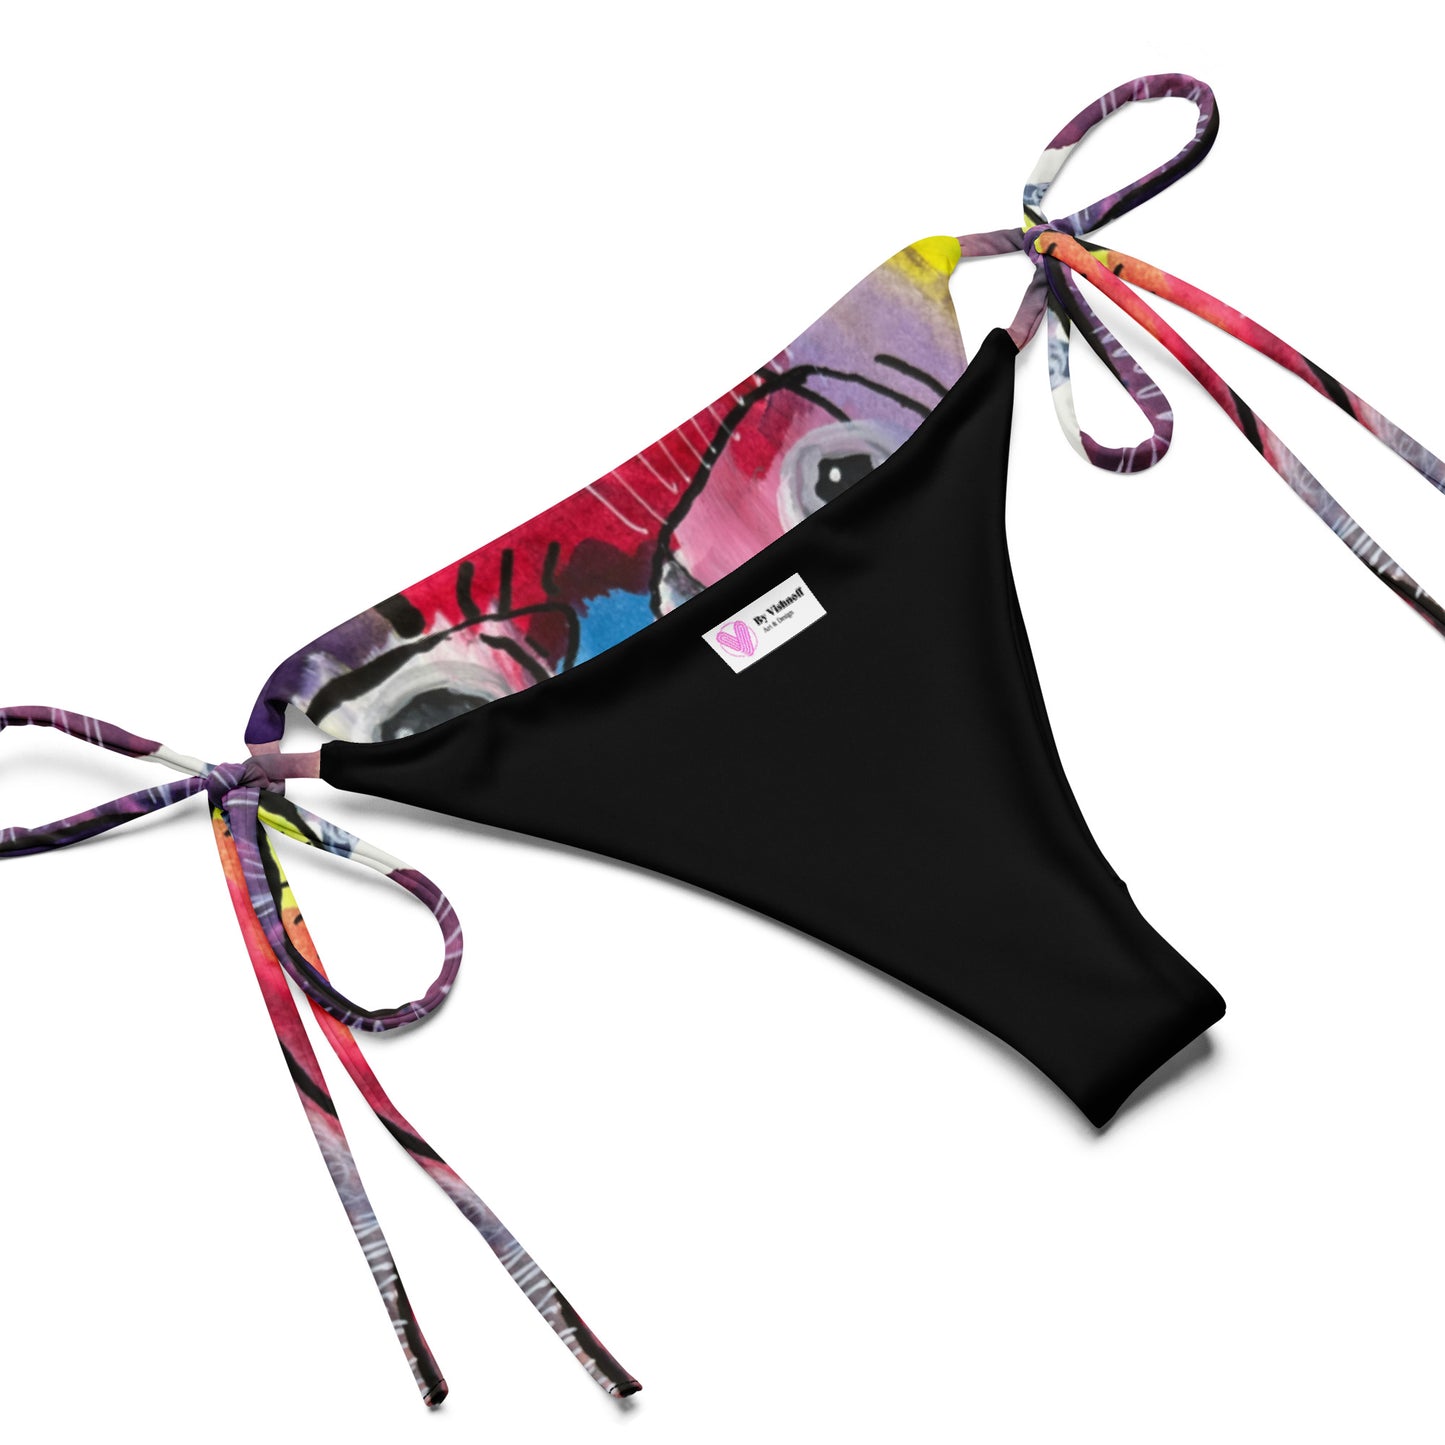 Faces III All-over print recycled string bikini